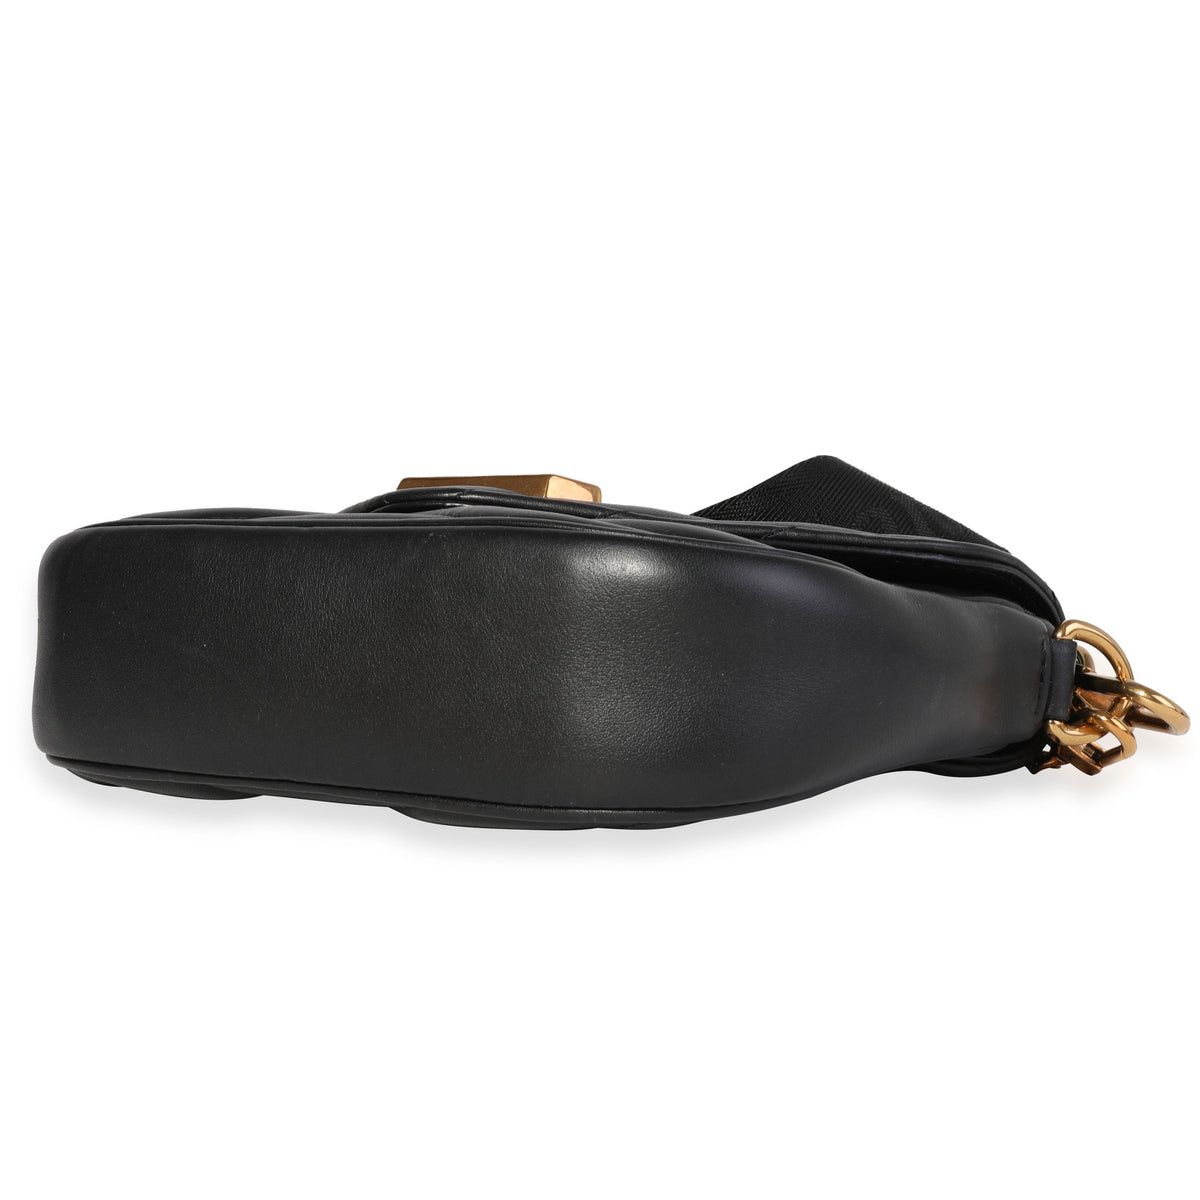 Louis Vuitton Black Leather Small New Wave Camera Bag, myGemma, IT